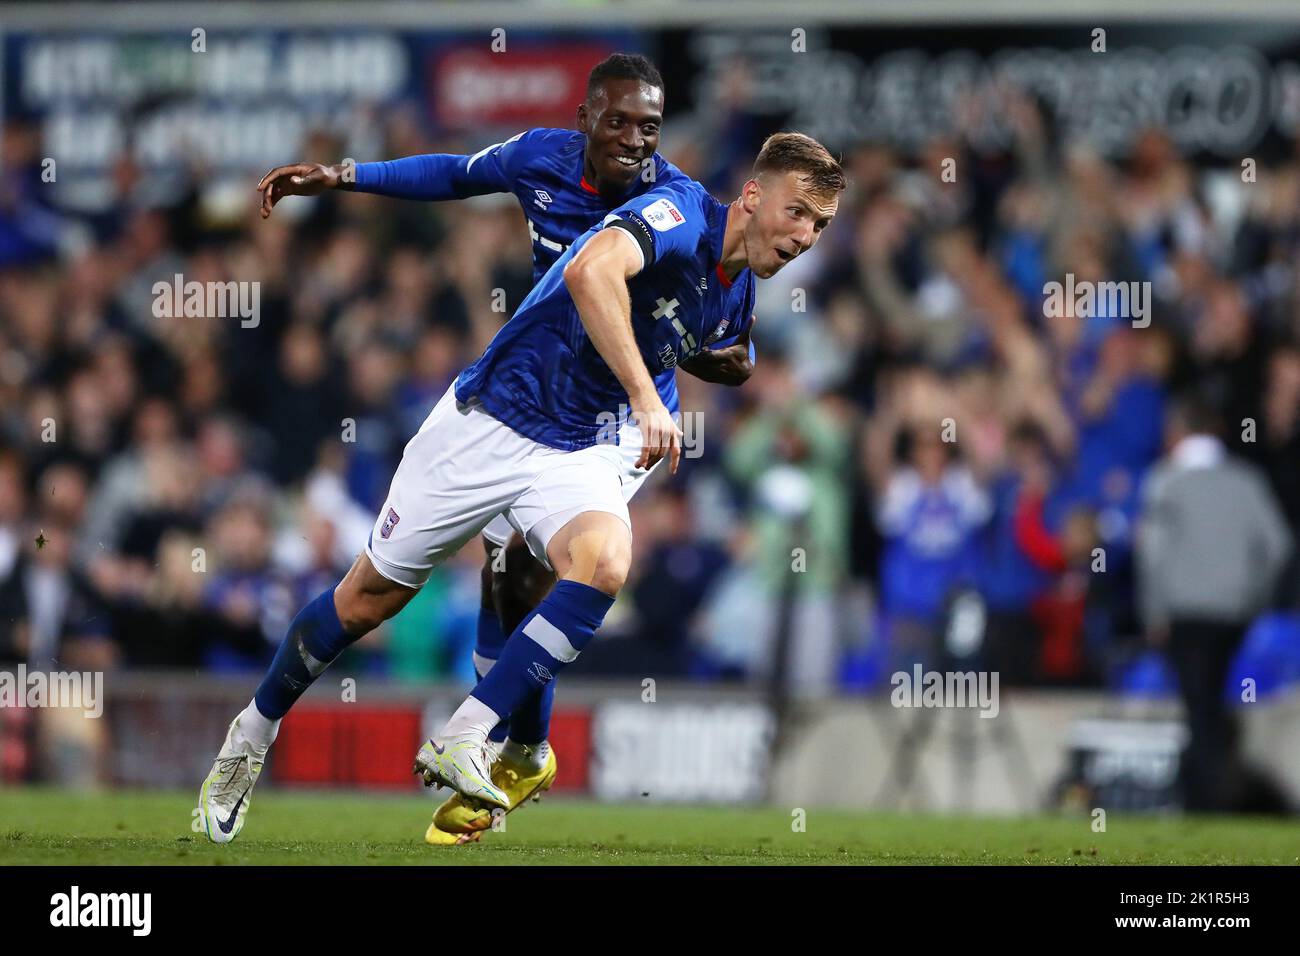 Lee Evans of Ipswich Town celebrates with Freddie Ladapo after scoring a goal to make it 2-0 - Ipswich Town v Bristol Rovers, Sky Bet League One, Portman Road, Ipswich, UK - 13th September 2022  Editorial Use Only - DataCo restrictions apply Stock Photo